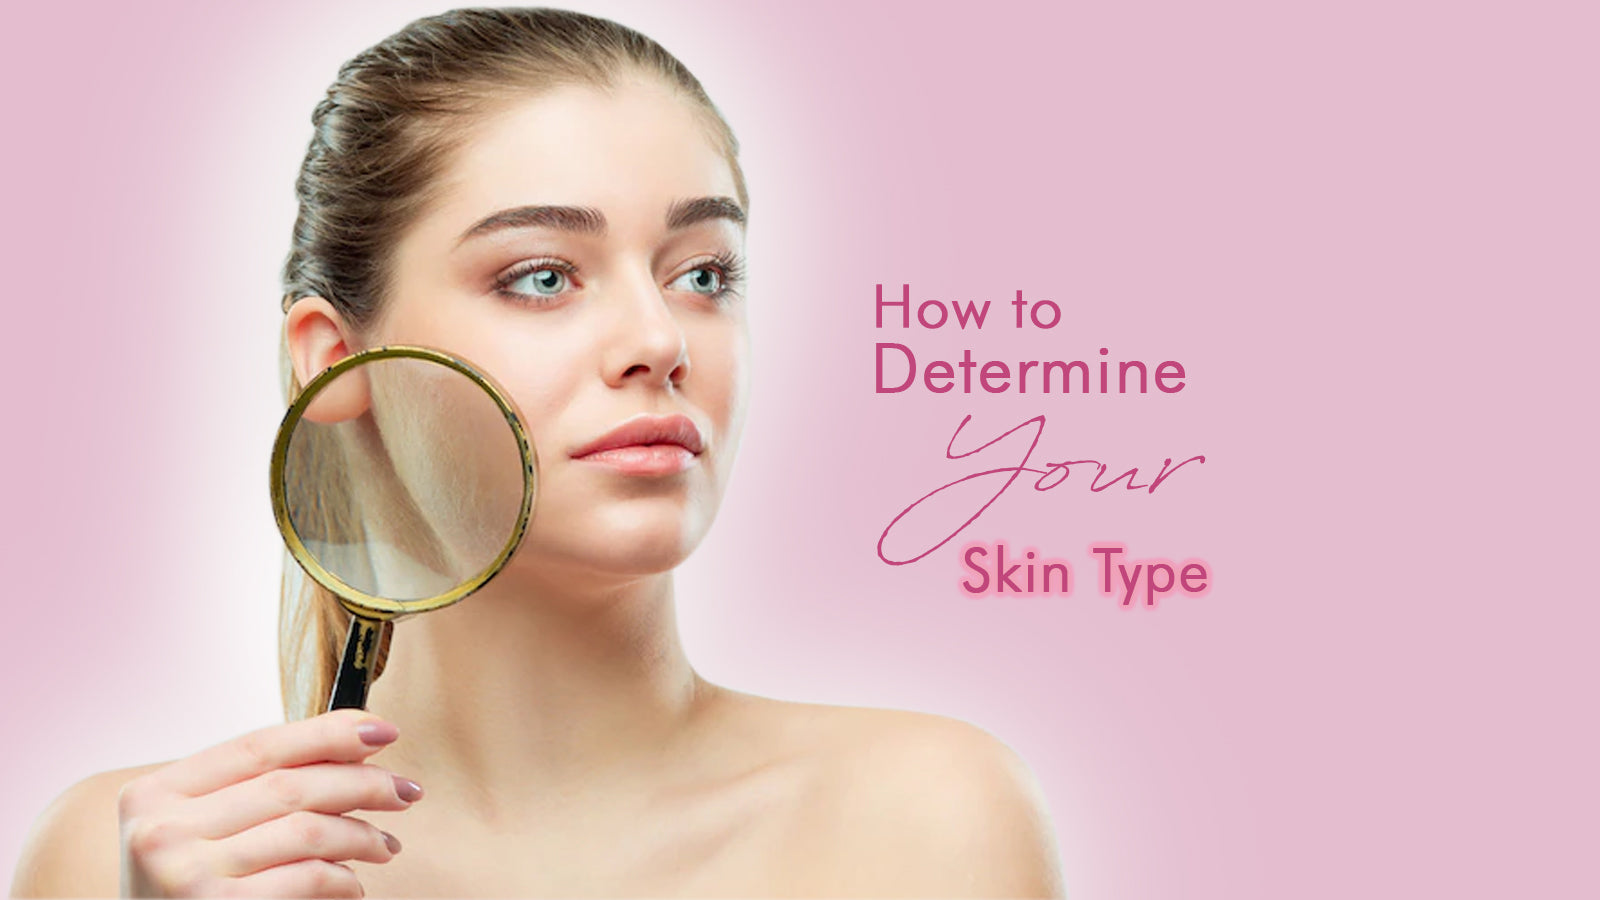 How to determine your skin type?